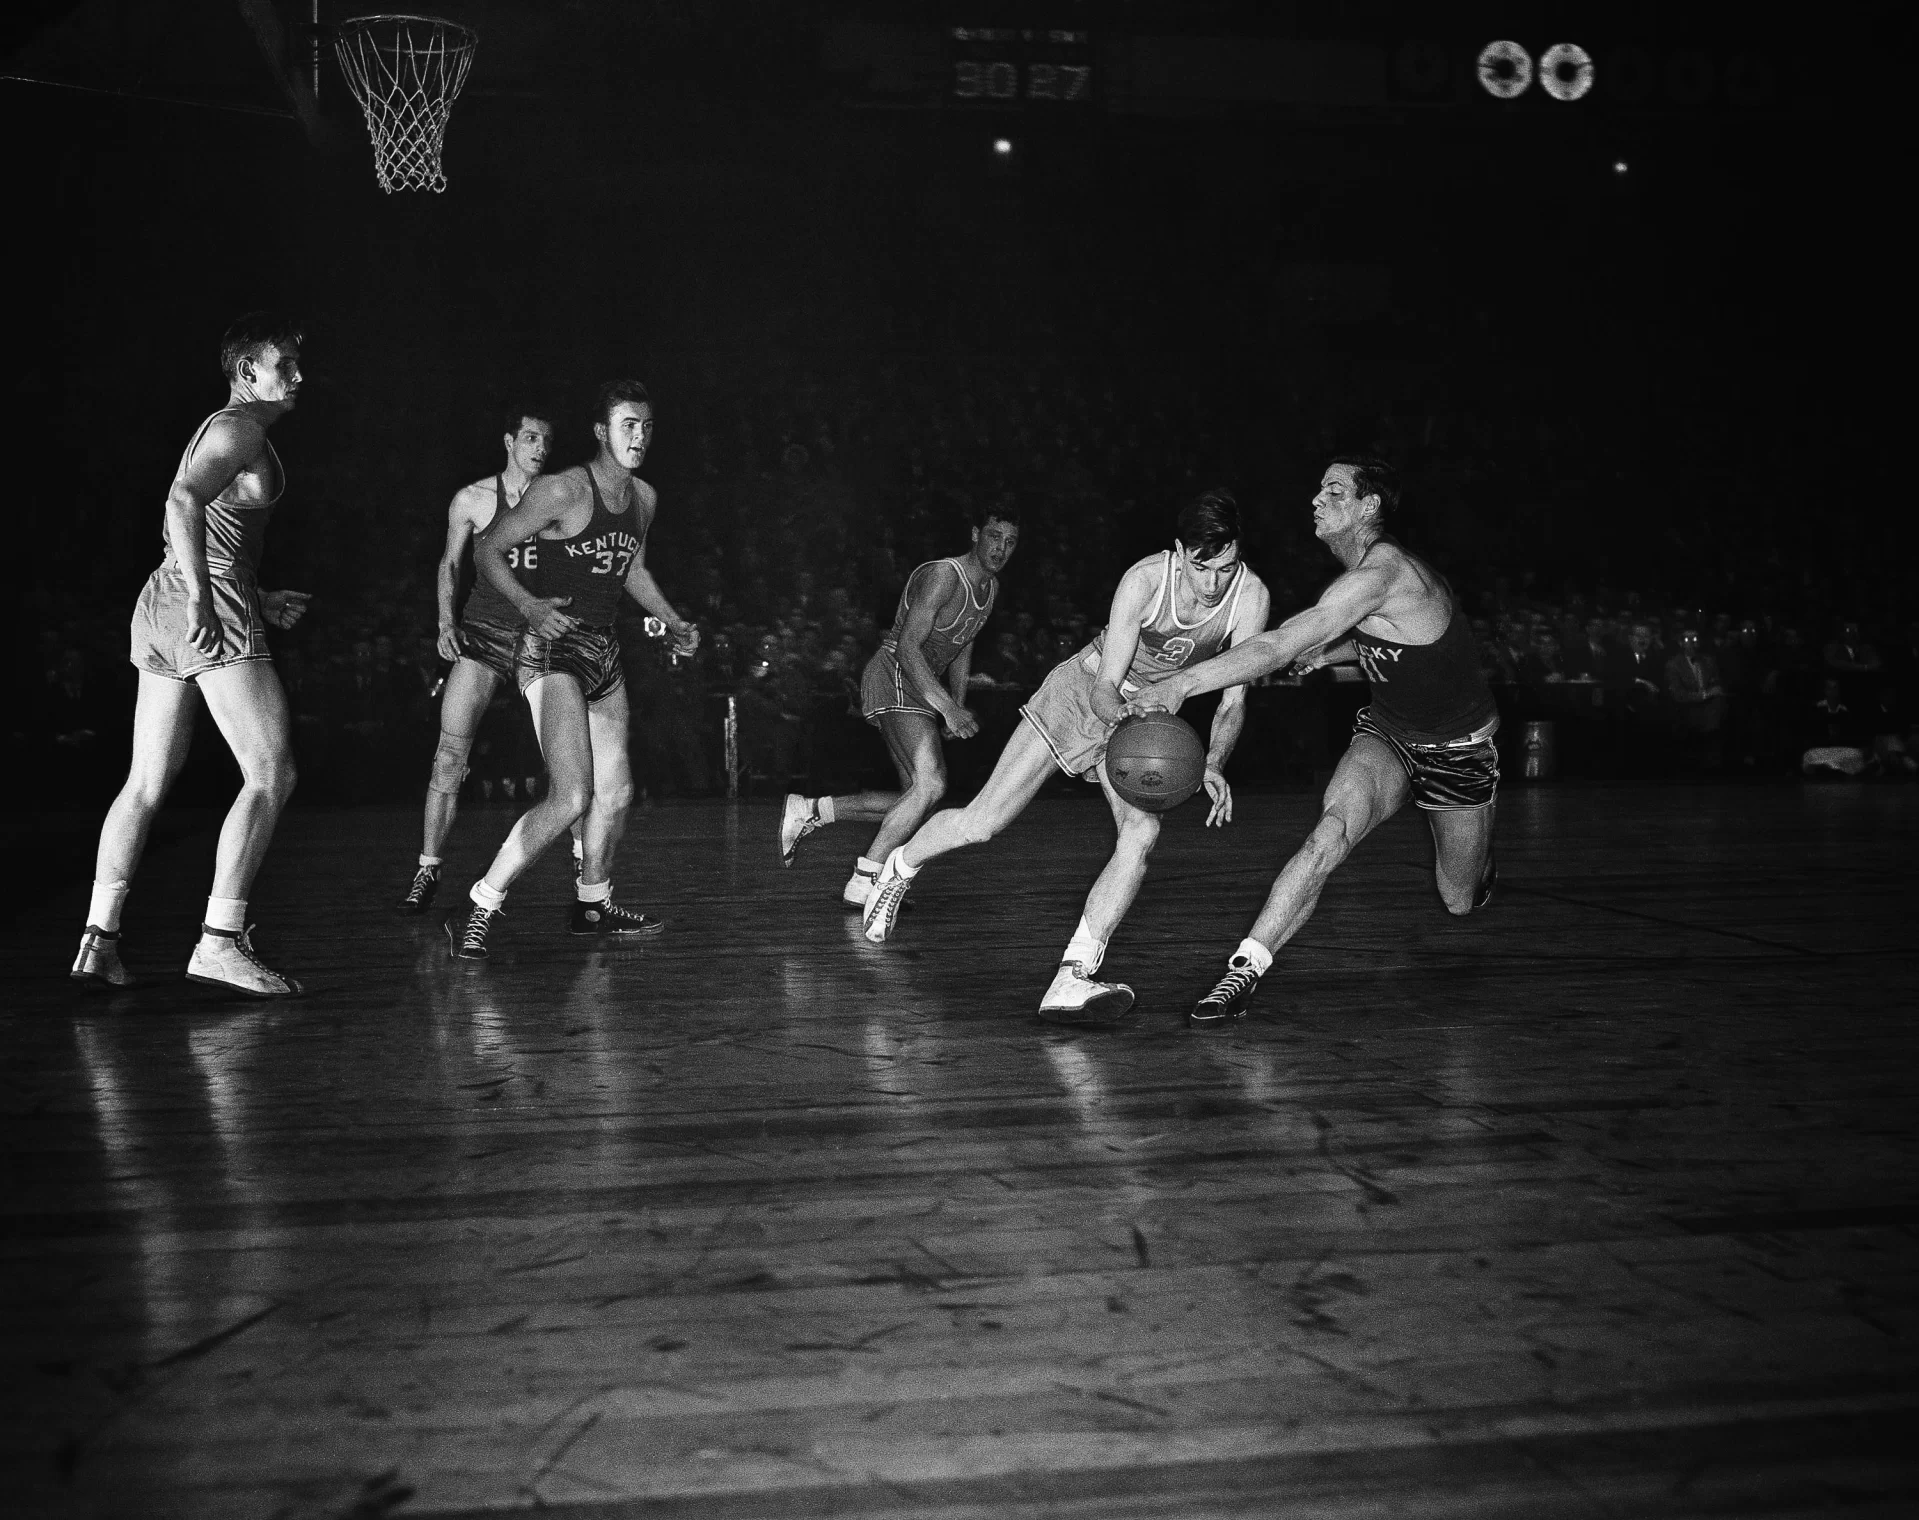 Ernie Calverley (3), Rhode Island State center, and Wallace Jones, right, Kentucky center, go into high gear attempting to take possession of a free ball in the second period of the final game of NIT at Madison Square Garden in New York, March 21, 1946. Calverley was named MVP in the tournament but his team lost the final game to Kentucky, 46-45. (AP Photo/Matty Zimmerman)